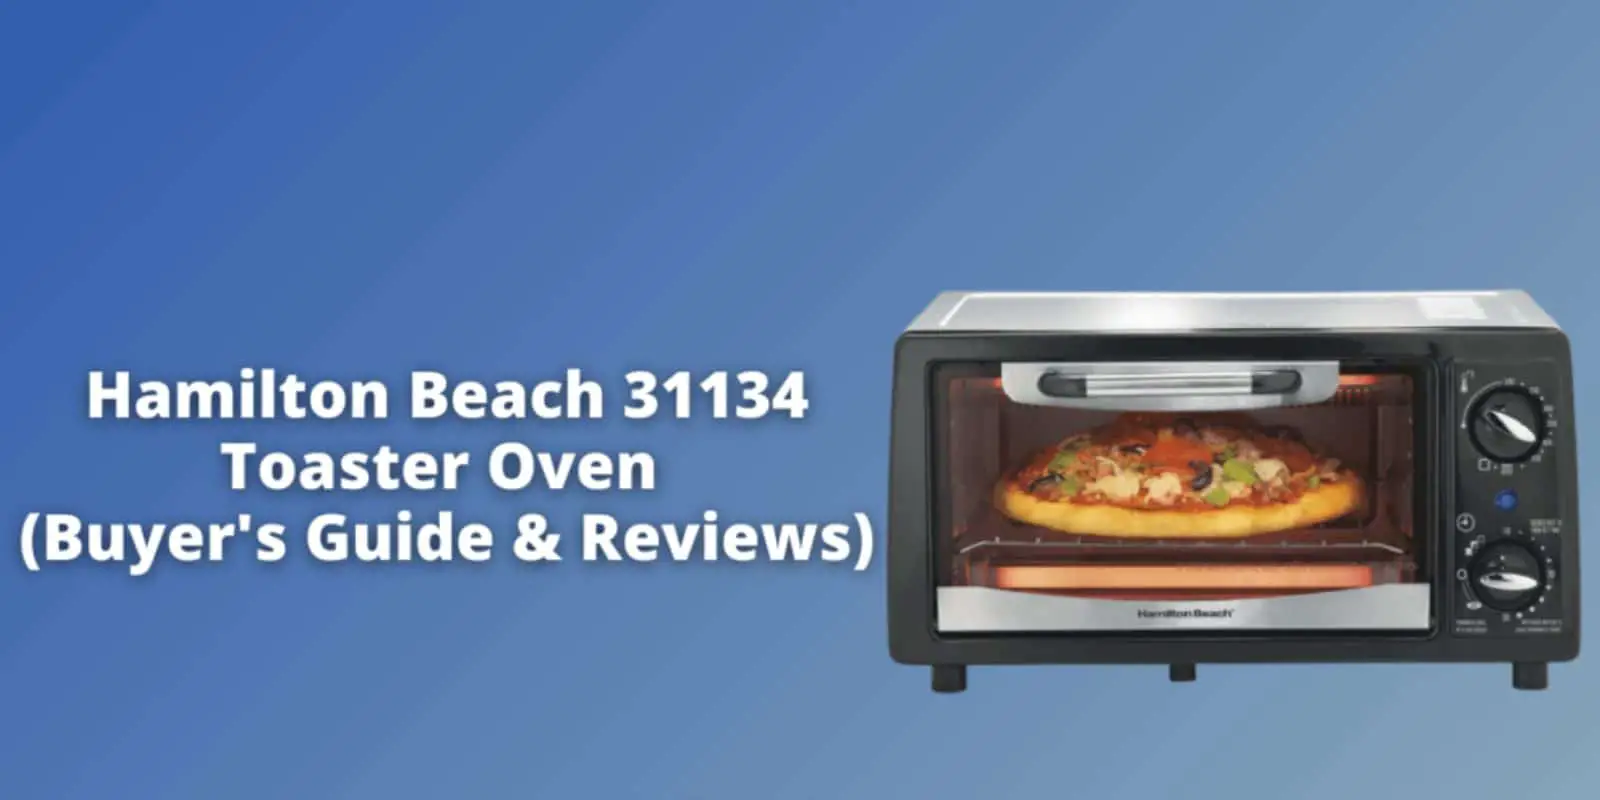 Hamilton Beach 31134 Toaster Oven | Specification, Features, Pros & Cons